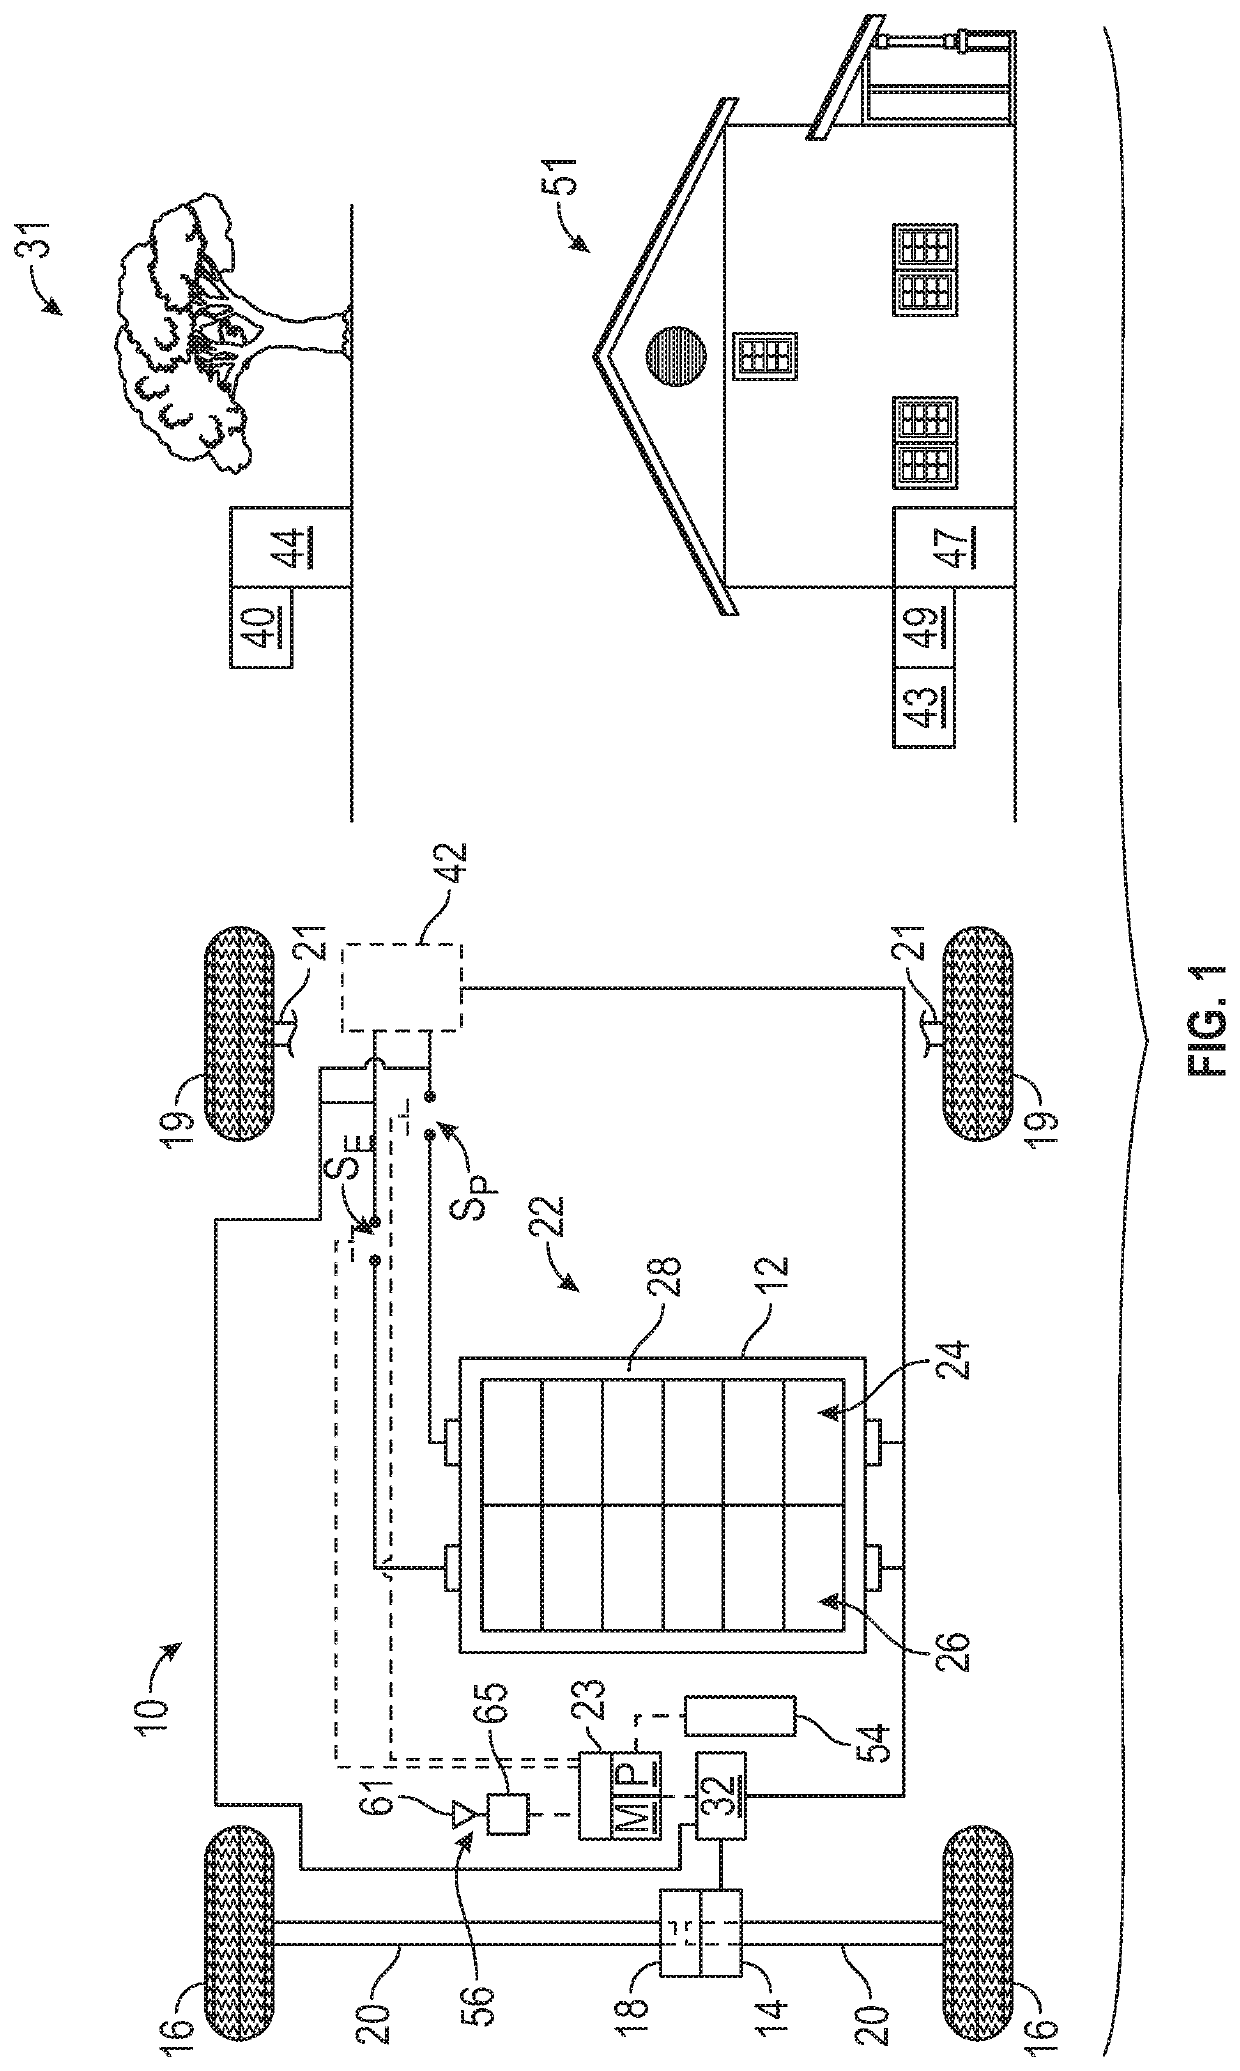 Vehicle with hybrid battery pack and human-machine interface and method of monitoring